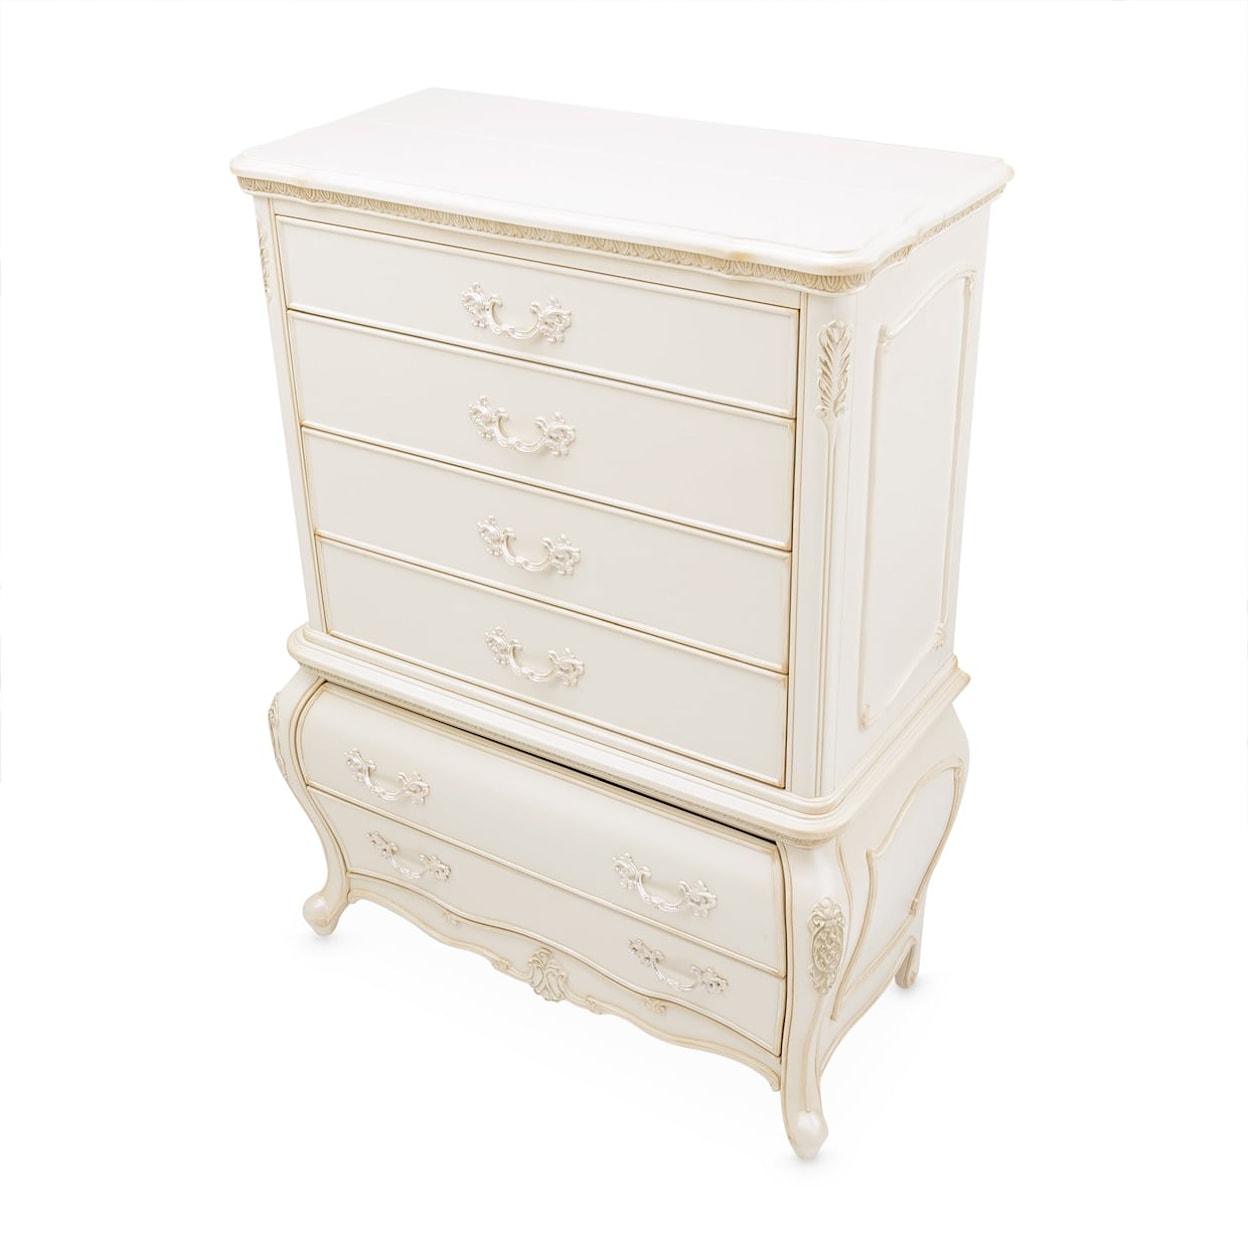 Michael Amini Lavelle Classic Pearl 6-Drawer Chest